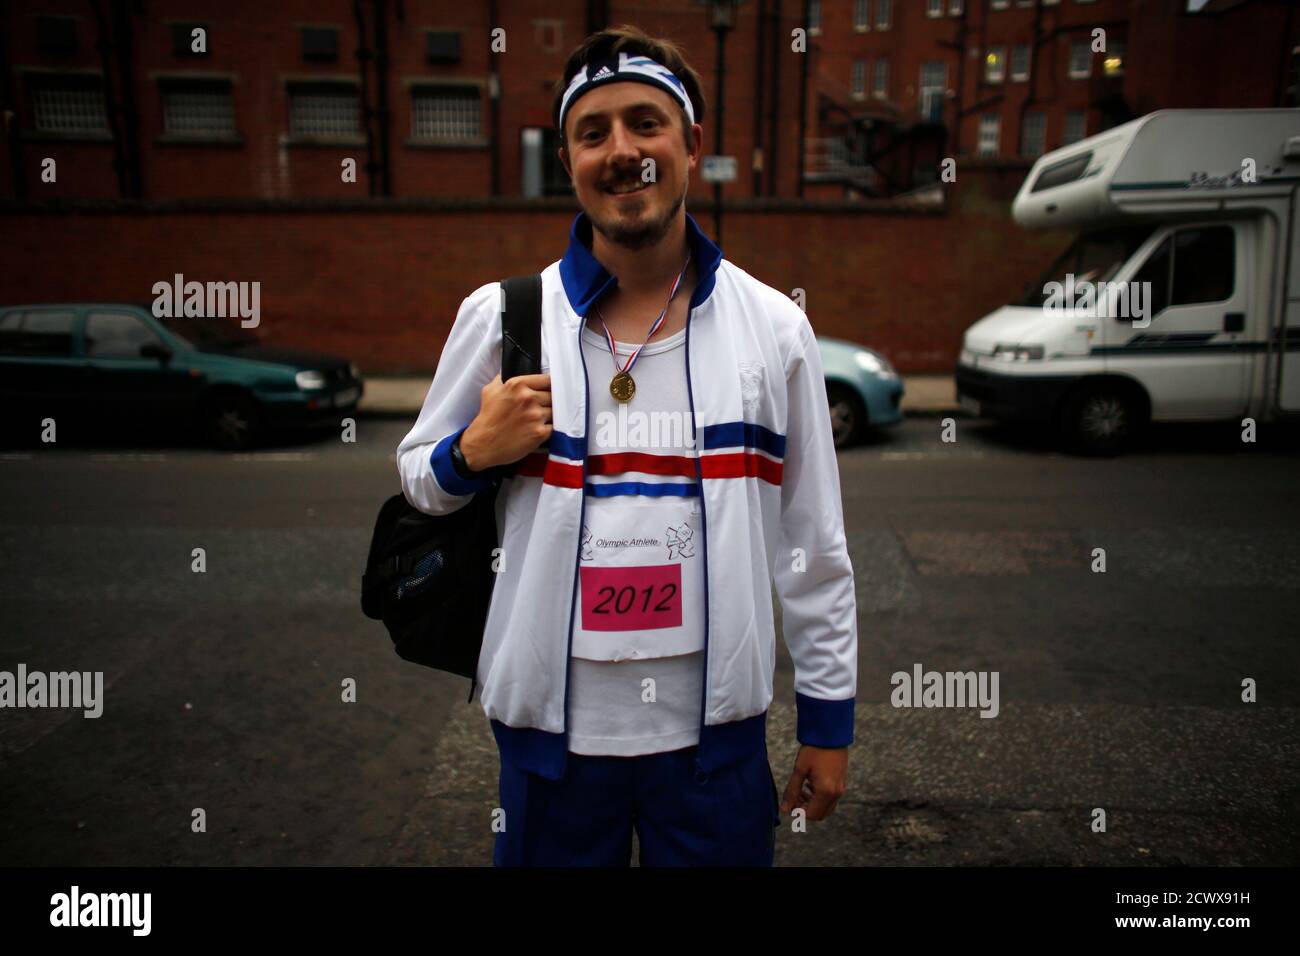 A man poses for a picture with his makeshift Olympic outfit on his way to a party during the night of the opening ceremony of London 2012 Olympic Games in London July 27, 2012. REUTERS/Mark Blinch (BRITAIN - Tags: SPORT OLYMPICS) Stock Photo